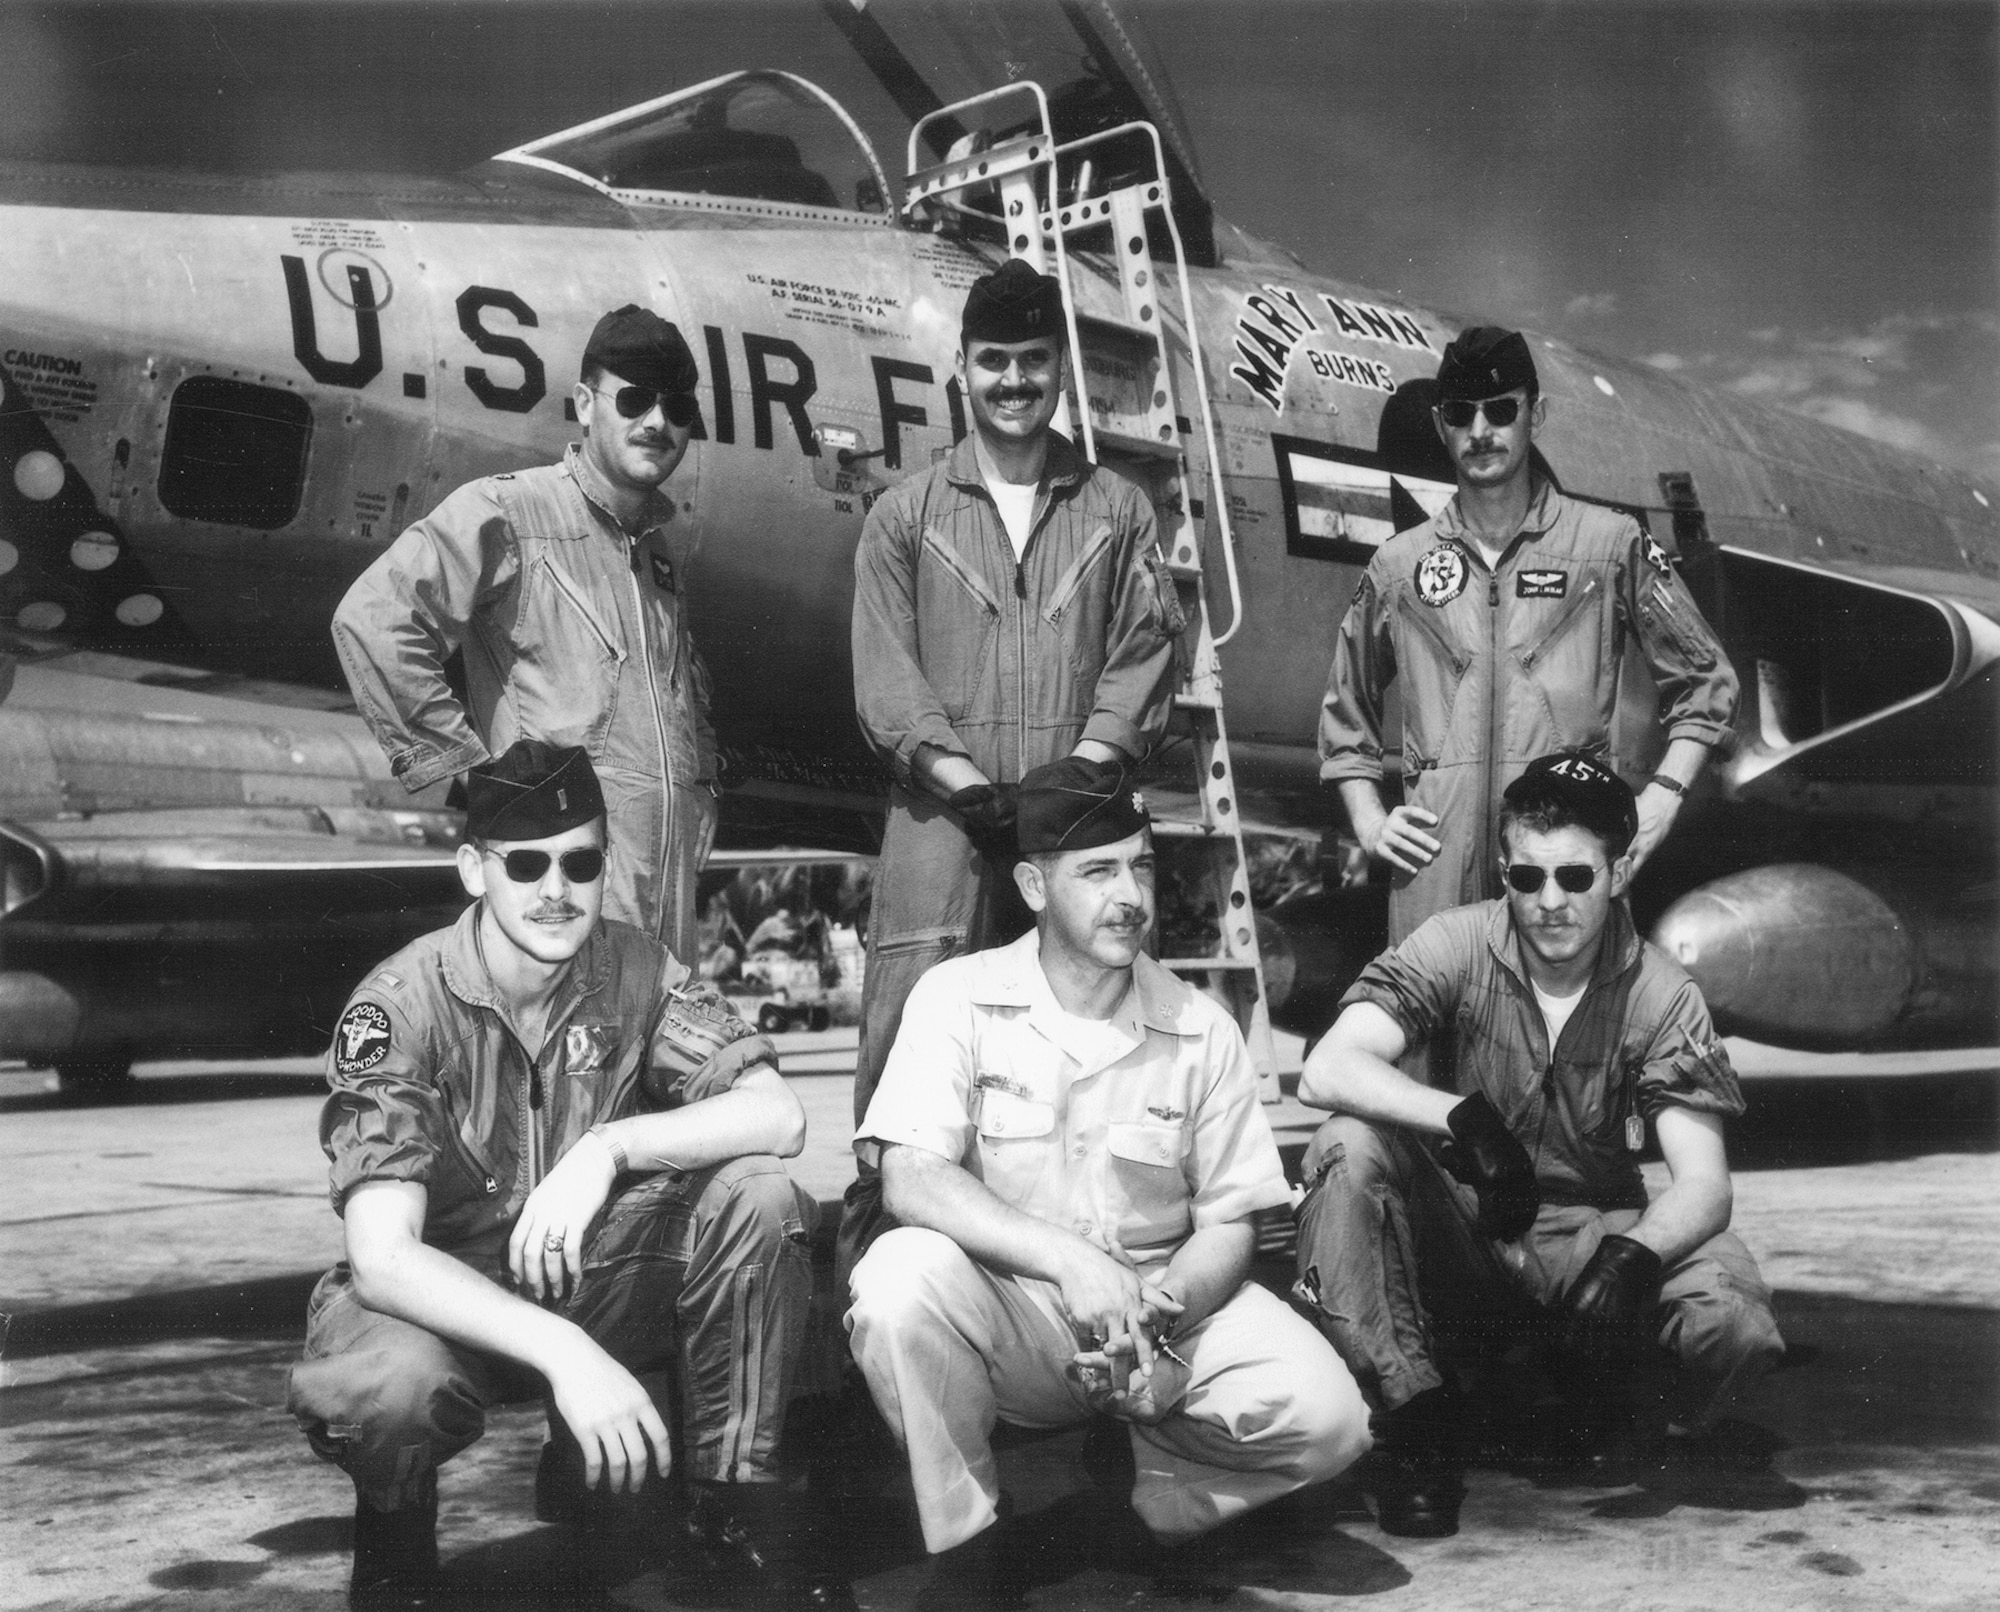 The first ABLE MABLE pilots in front of an RF-101C: Front row (left to right) 1st Lt. Fred Muesegaes, Maj. Ken Harbst and 1st Lt. Jack Weatherby; Back row (left to right) Capt. Ralph DeLucia, Capt. Bill Whitten and 1st Lt. John Linihan. Muesegaes, Weatherby, Linihan and Whitten also flew RT-33A PROJECT FIELD GOAL missions. (U.S. Air Force photo)